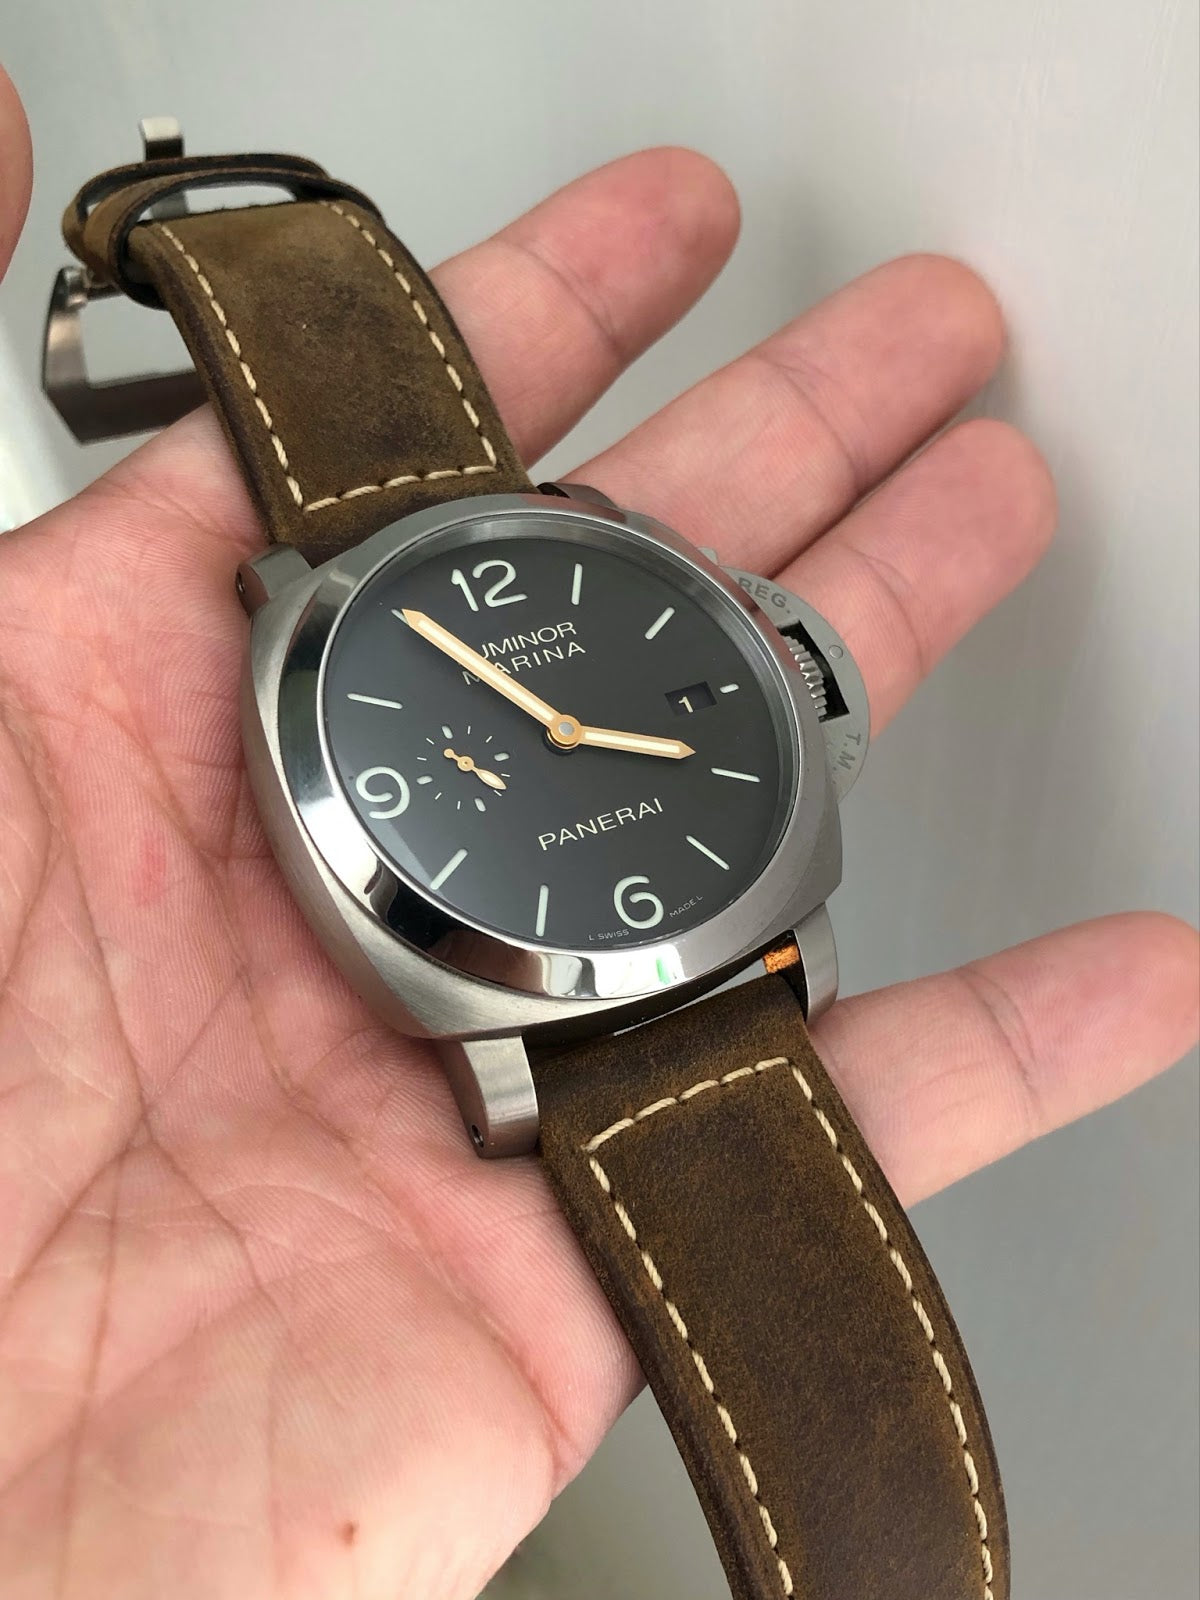 panerai watch held in a hand